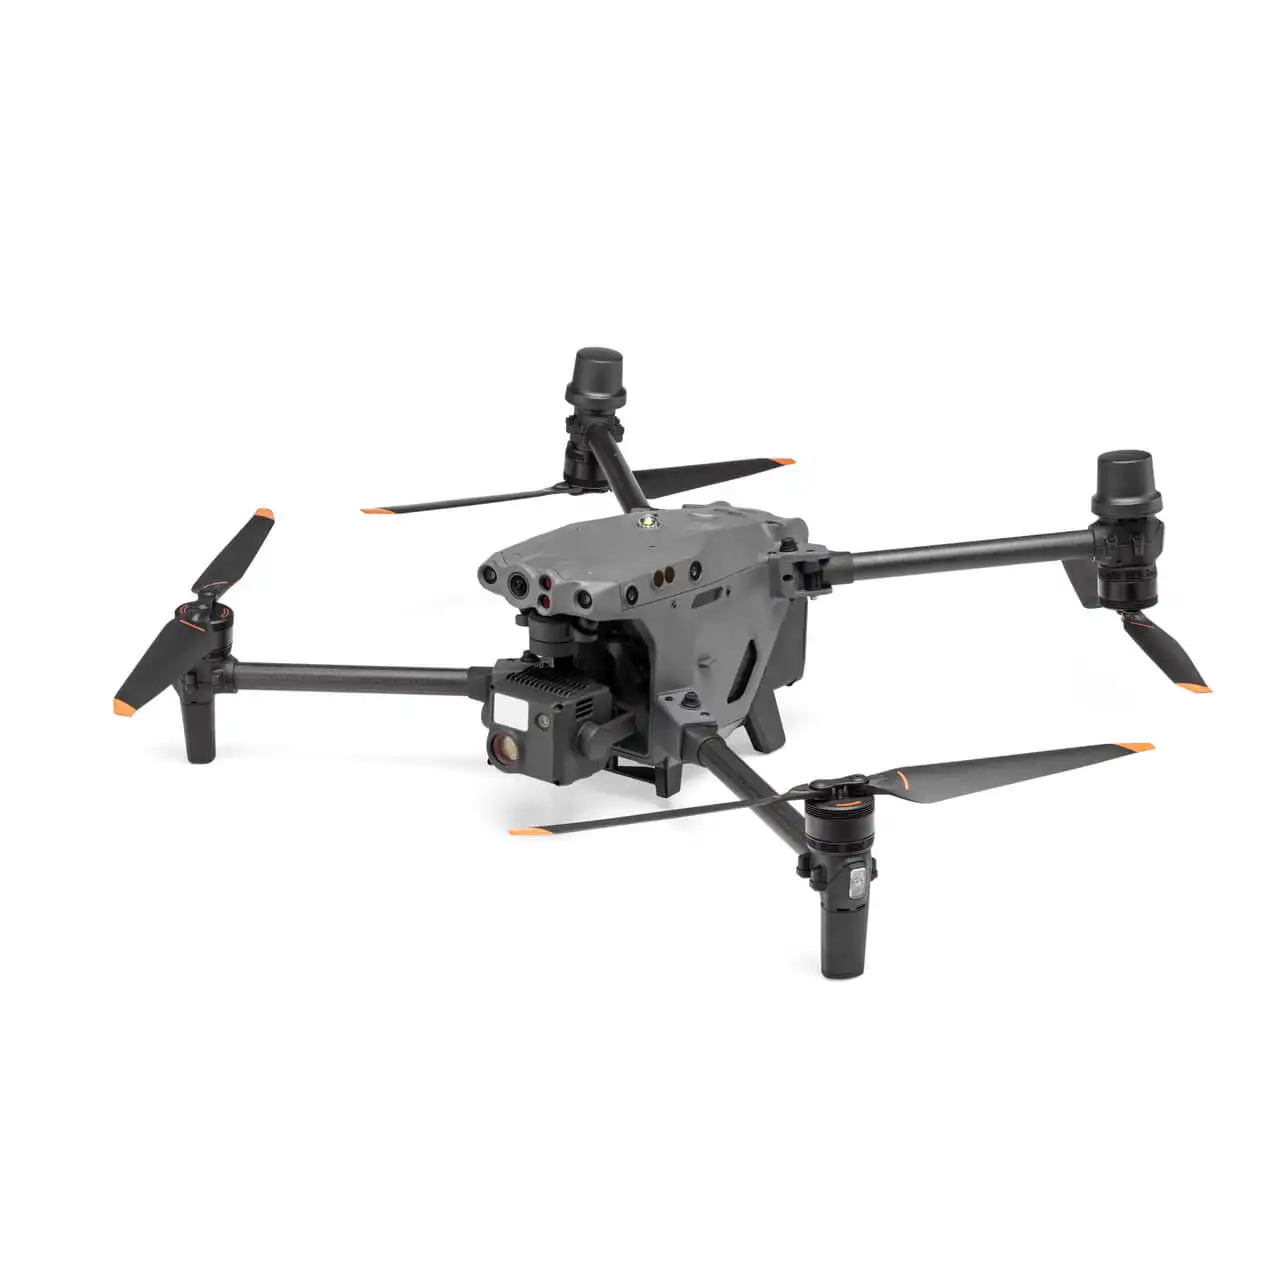 DJI M30/M30T Drone Matrice 30/30T with 4k HD Thermal Camera and 40+ Mins Long Distance GPS RC UAV